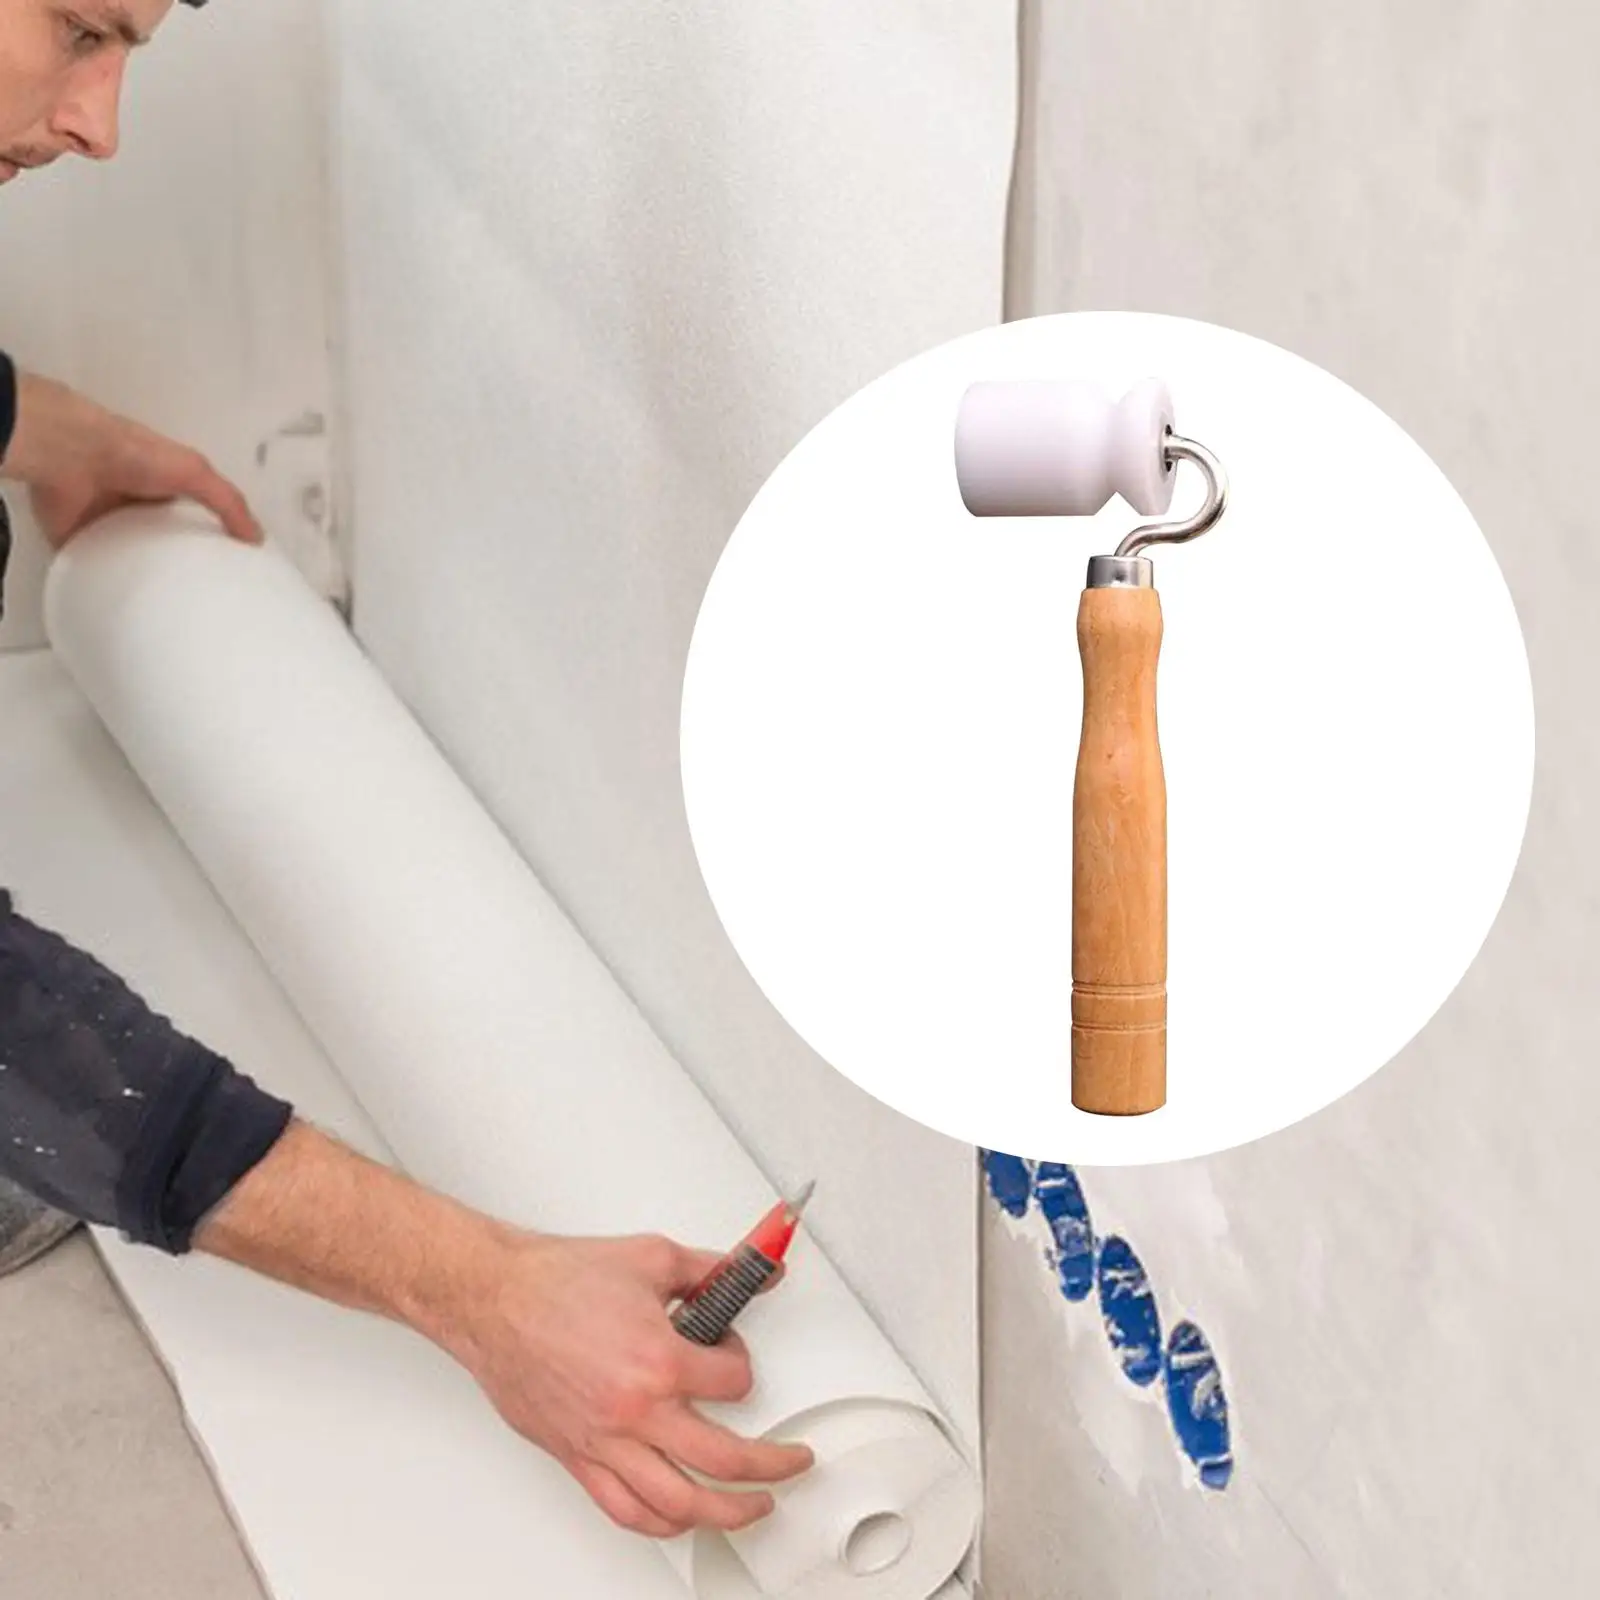 Wallpaper Seam Roller Ergonomic Decorating Roller Hand Pressure Roller for Most Kinds Wall Papers Home Decor Edge Roller